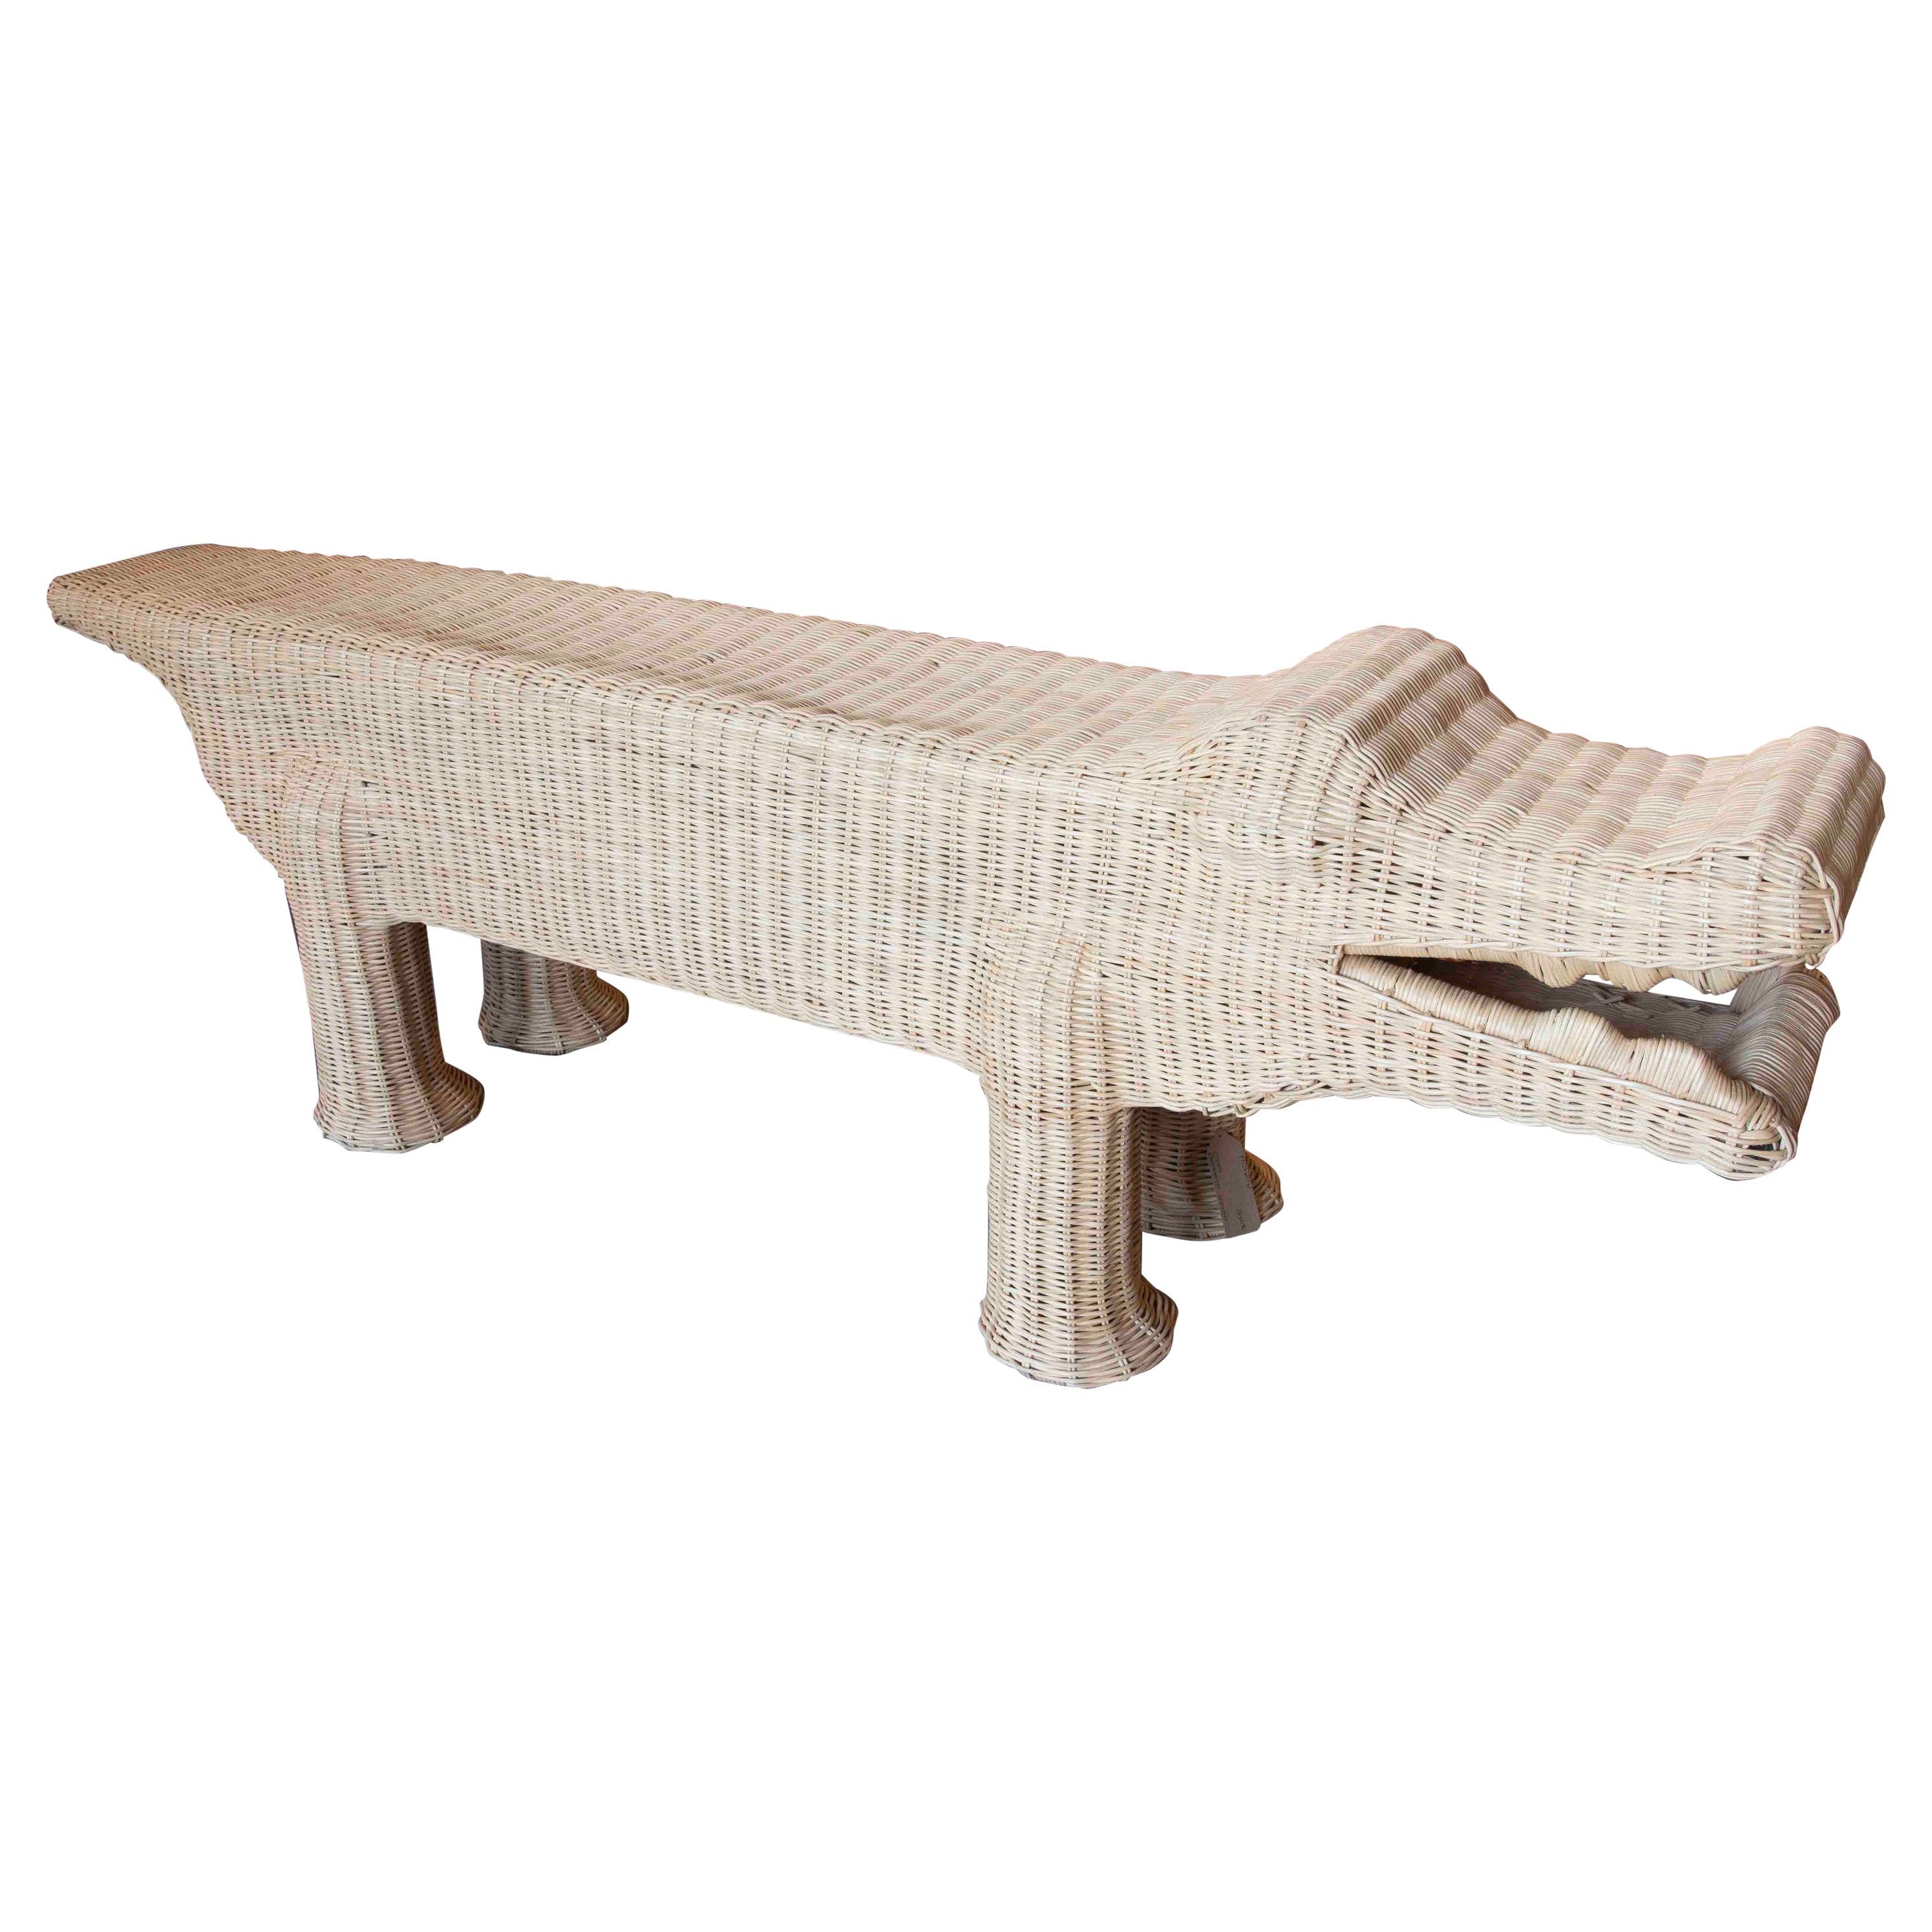 Crocodile Bench Made of Wicker with Iron Structure in Natural Tone